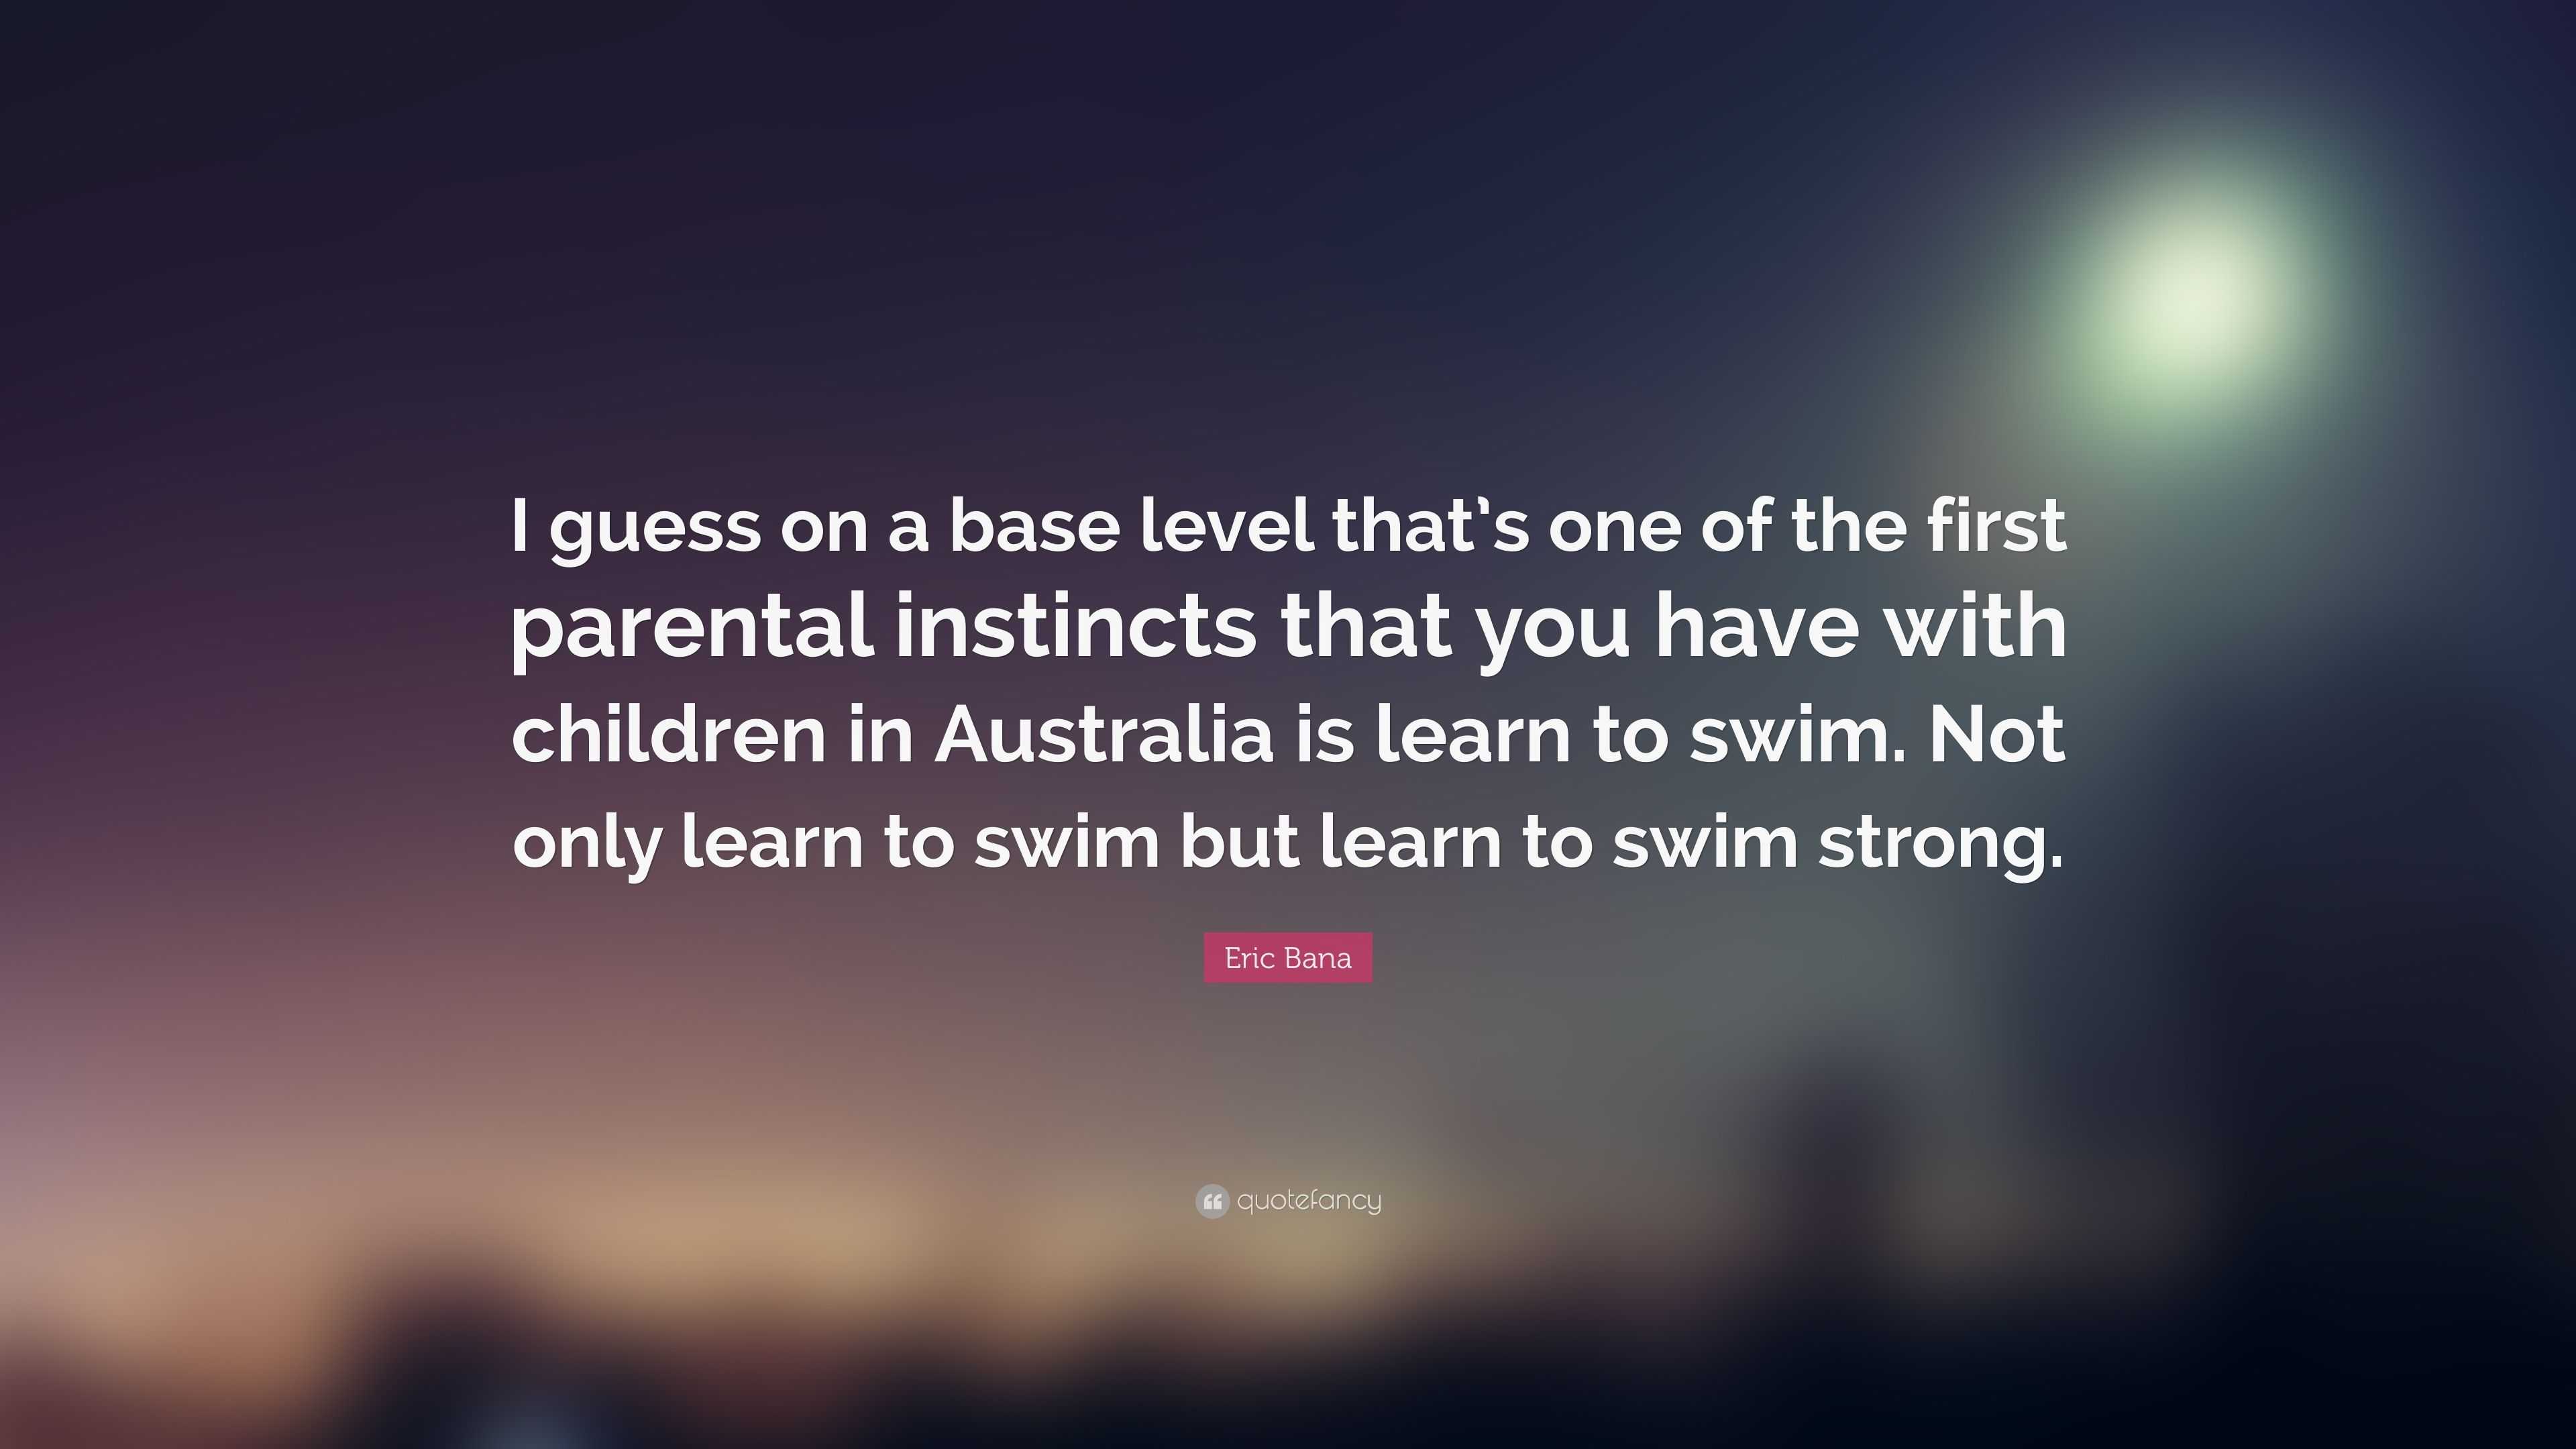 Eric Bana Quote: “I guess on base level that's one of the parental instincts that you have with children Australia is learn to ...”